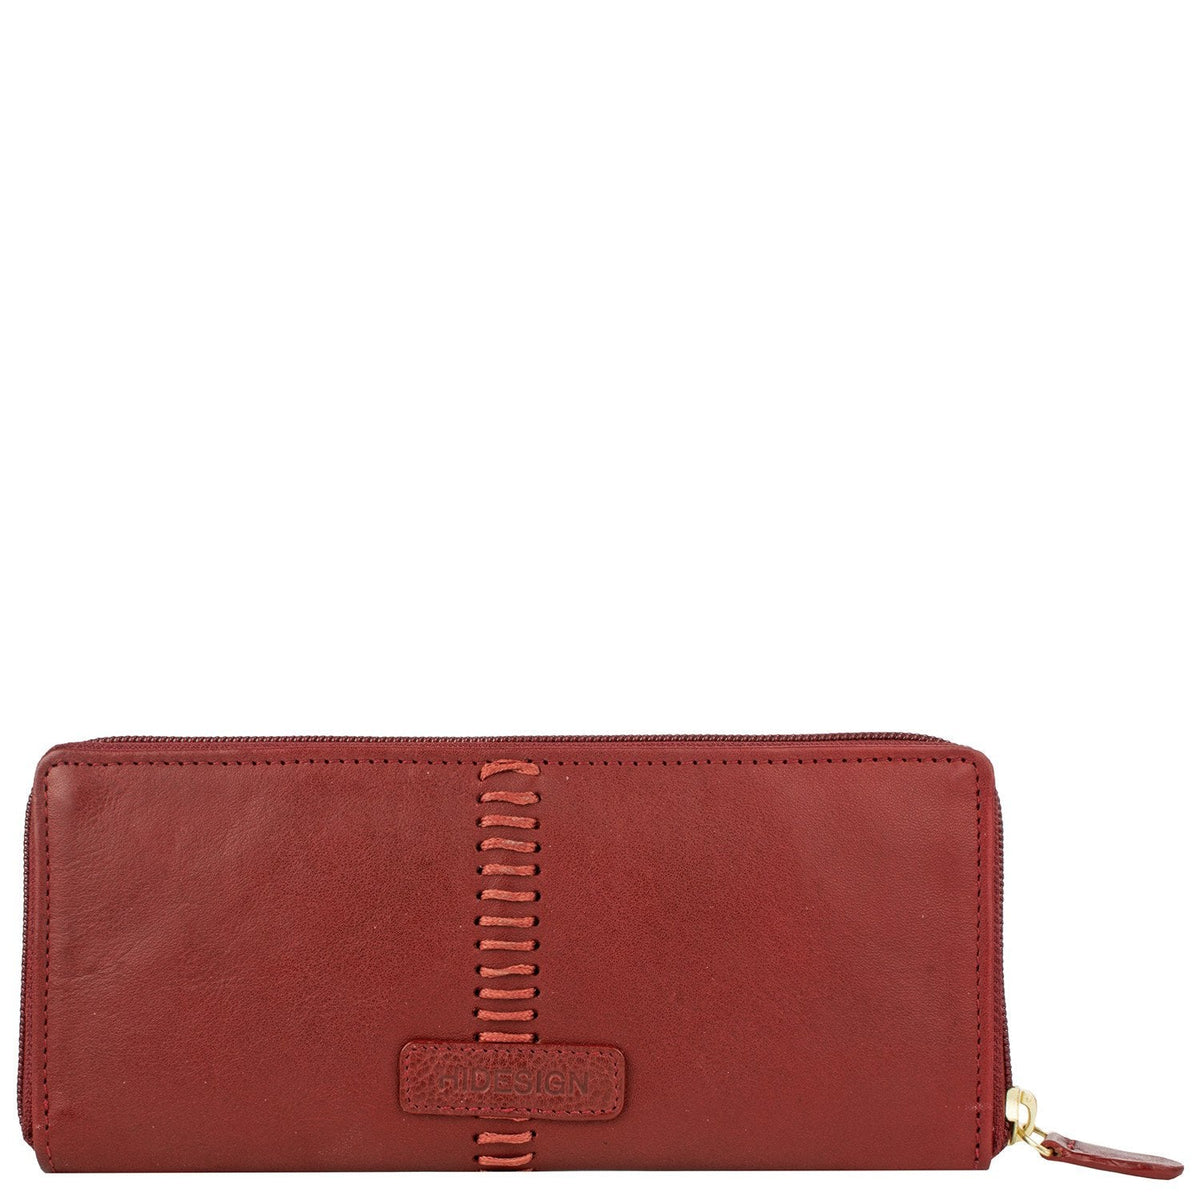 Bags & Luggage - Women's Bags - Wallets Stitch Zip Around Leather Wallet